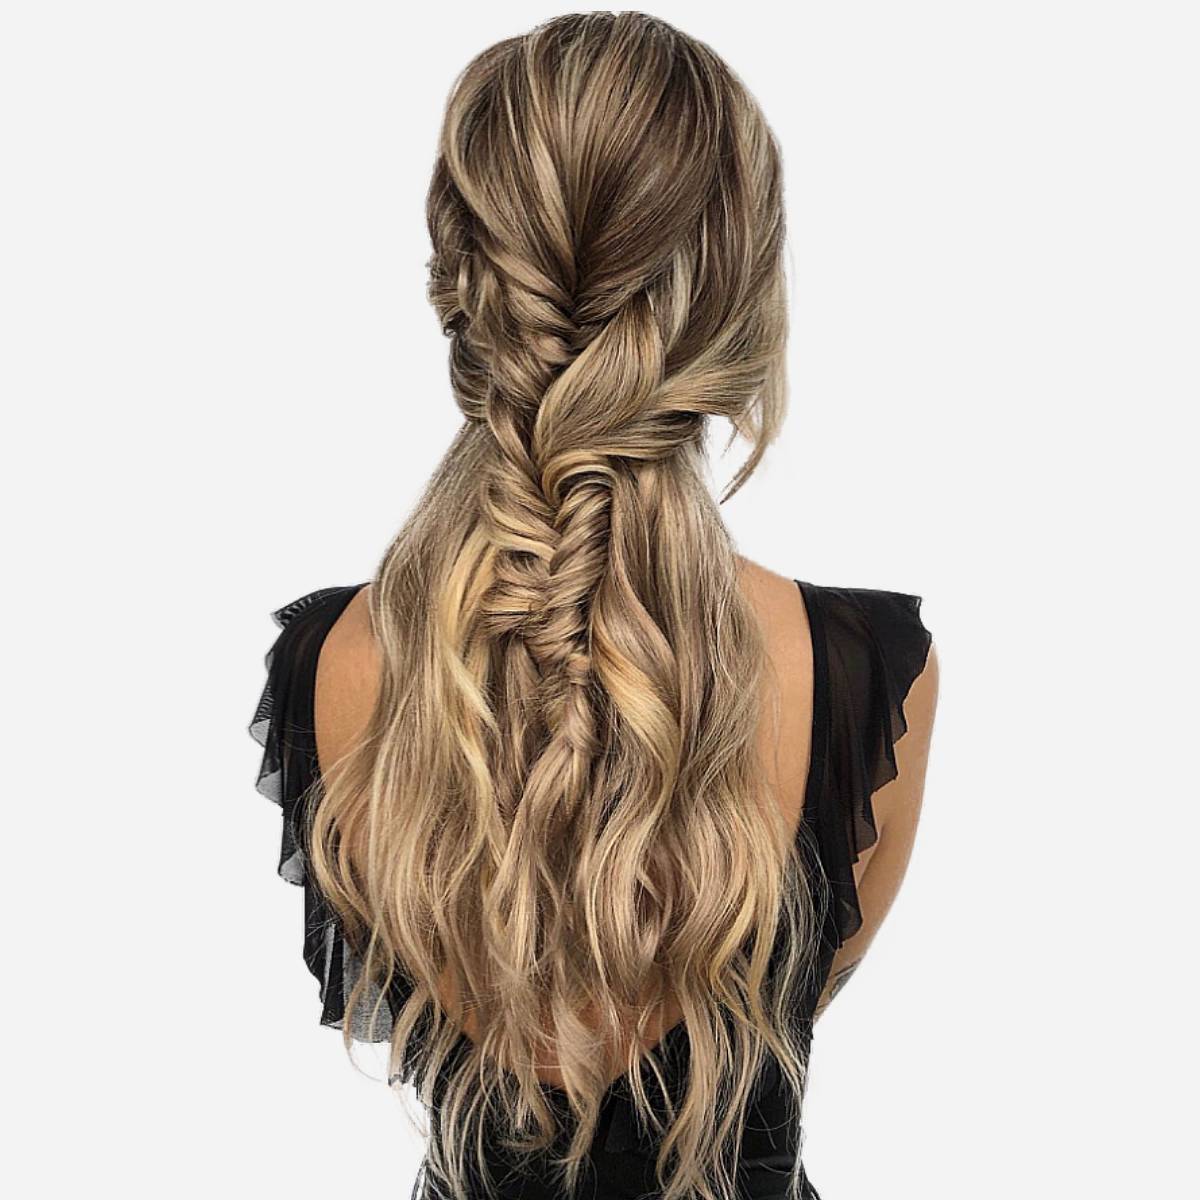 Snake Weave Tie Back Hairstyle | Hairstyles For Girls - Princess Hairstyles